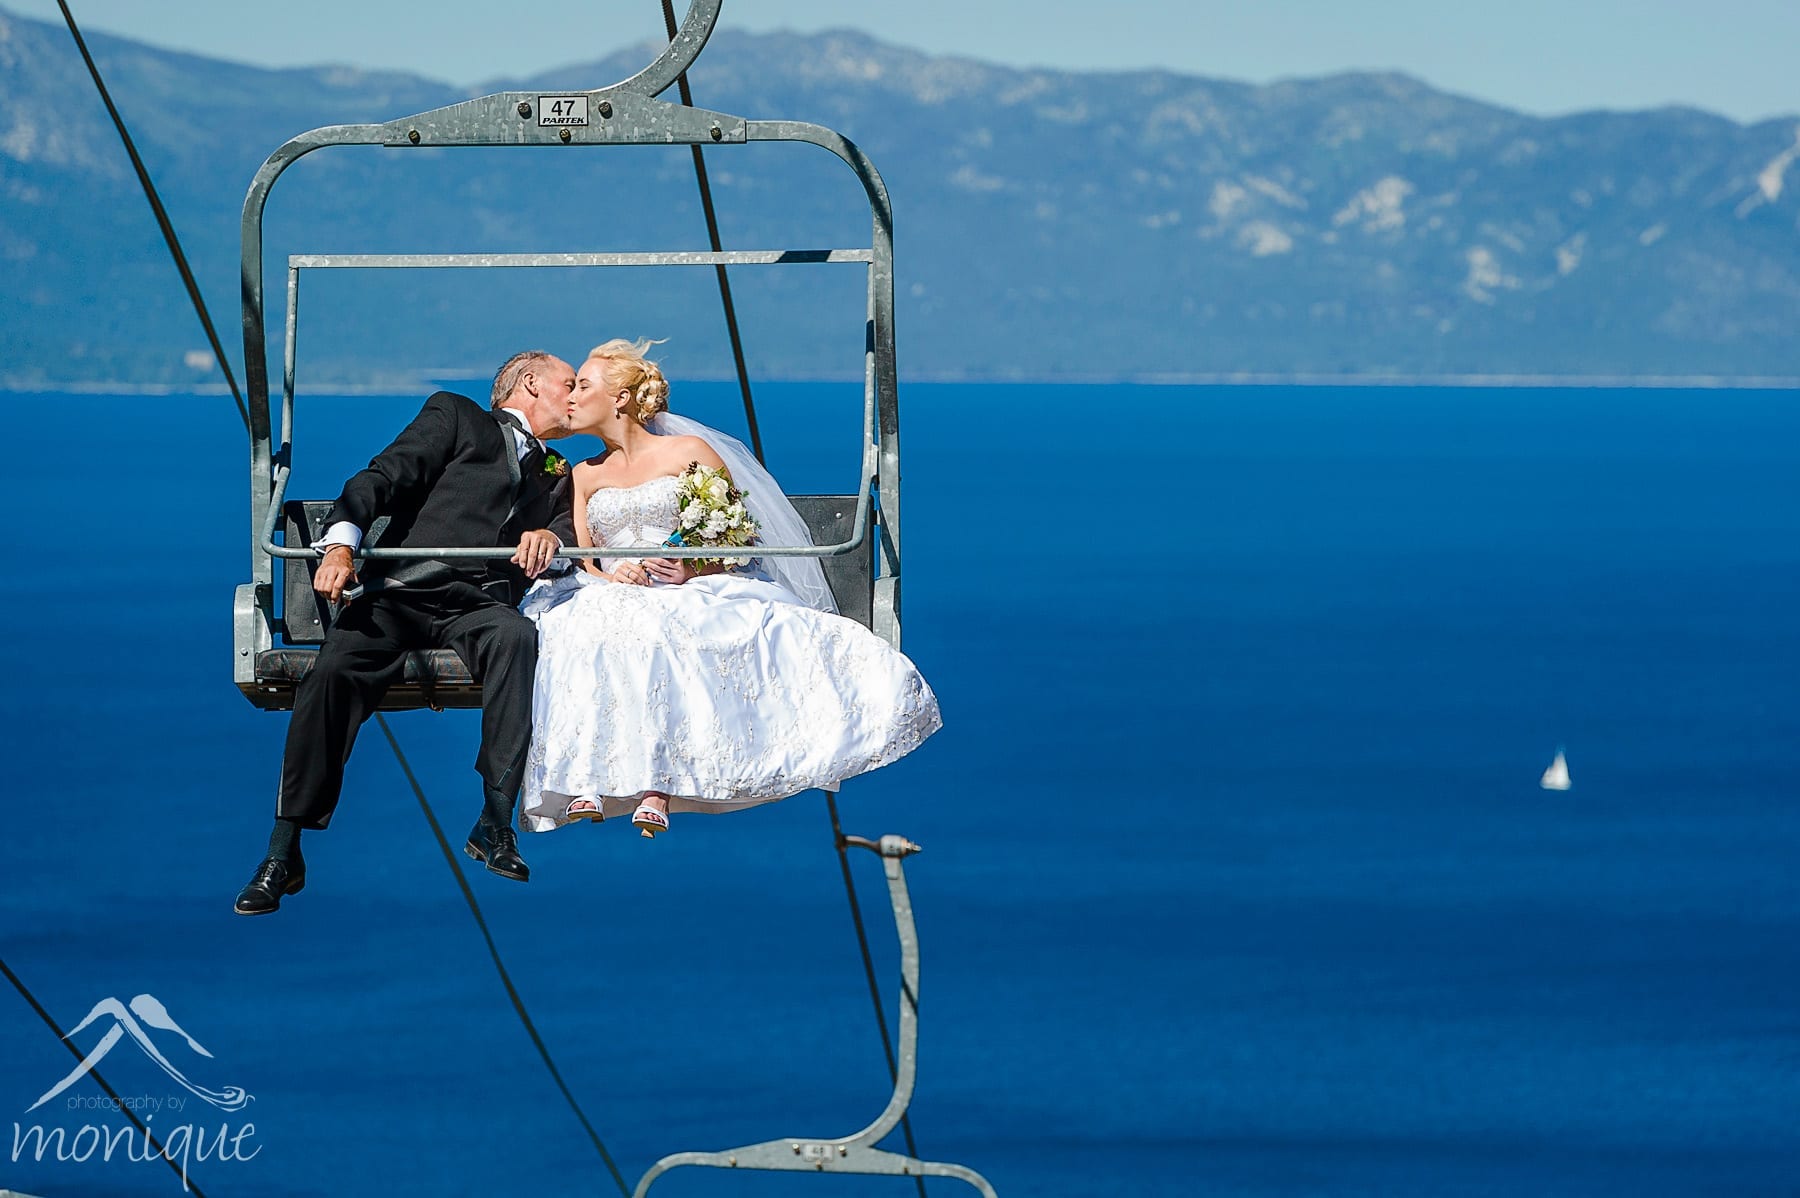 Homewood Mountain Ski Resort wedding photography by Photography by Monique on top of the mountain with Lake Tahoe in the background and the bride and her father riding the chair lift